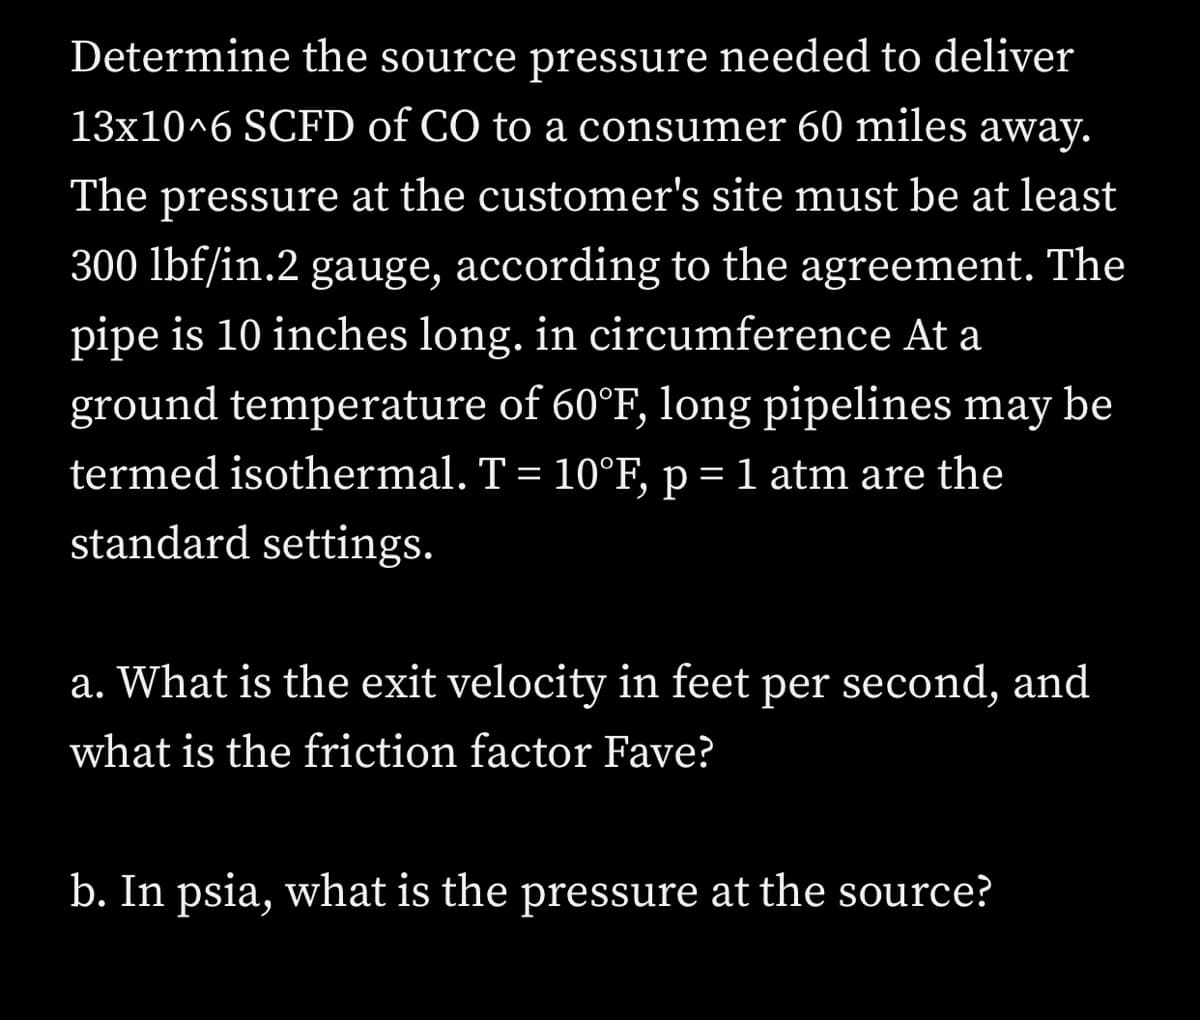 Determine the source pressure needed to deliver
13x10^6 SCFD of CO to a consumer 60 miles away.
The pressure at the customer's site must be at least
300 lbf/in.2 gauge, according to the agreement. The
pipe is 10 inches long. in circumference At a
ground temperature of 60°F, long pipelines may be
termed isothermal. T = 10°F, p = 1 atm are the
standard settings.
a. What is the exit velocity in feet per second, and
what is the friction factor Fave?
b. In psia, what is the pressure at the source?
